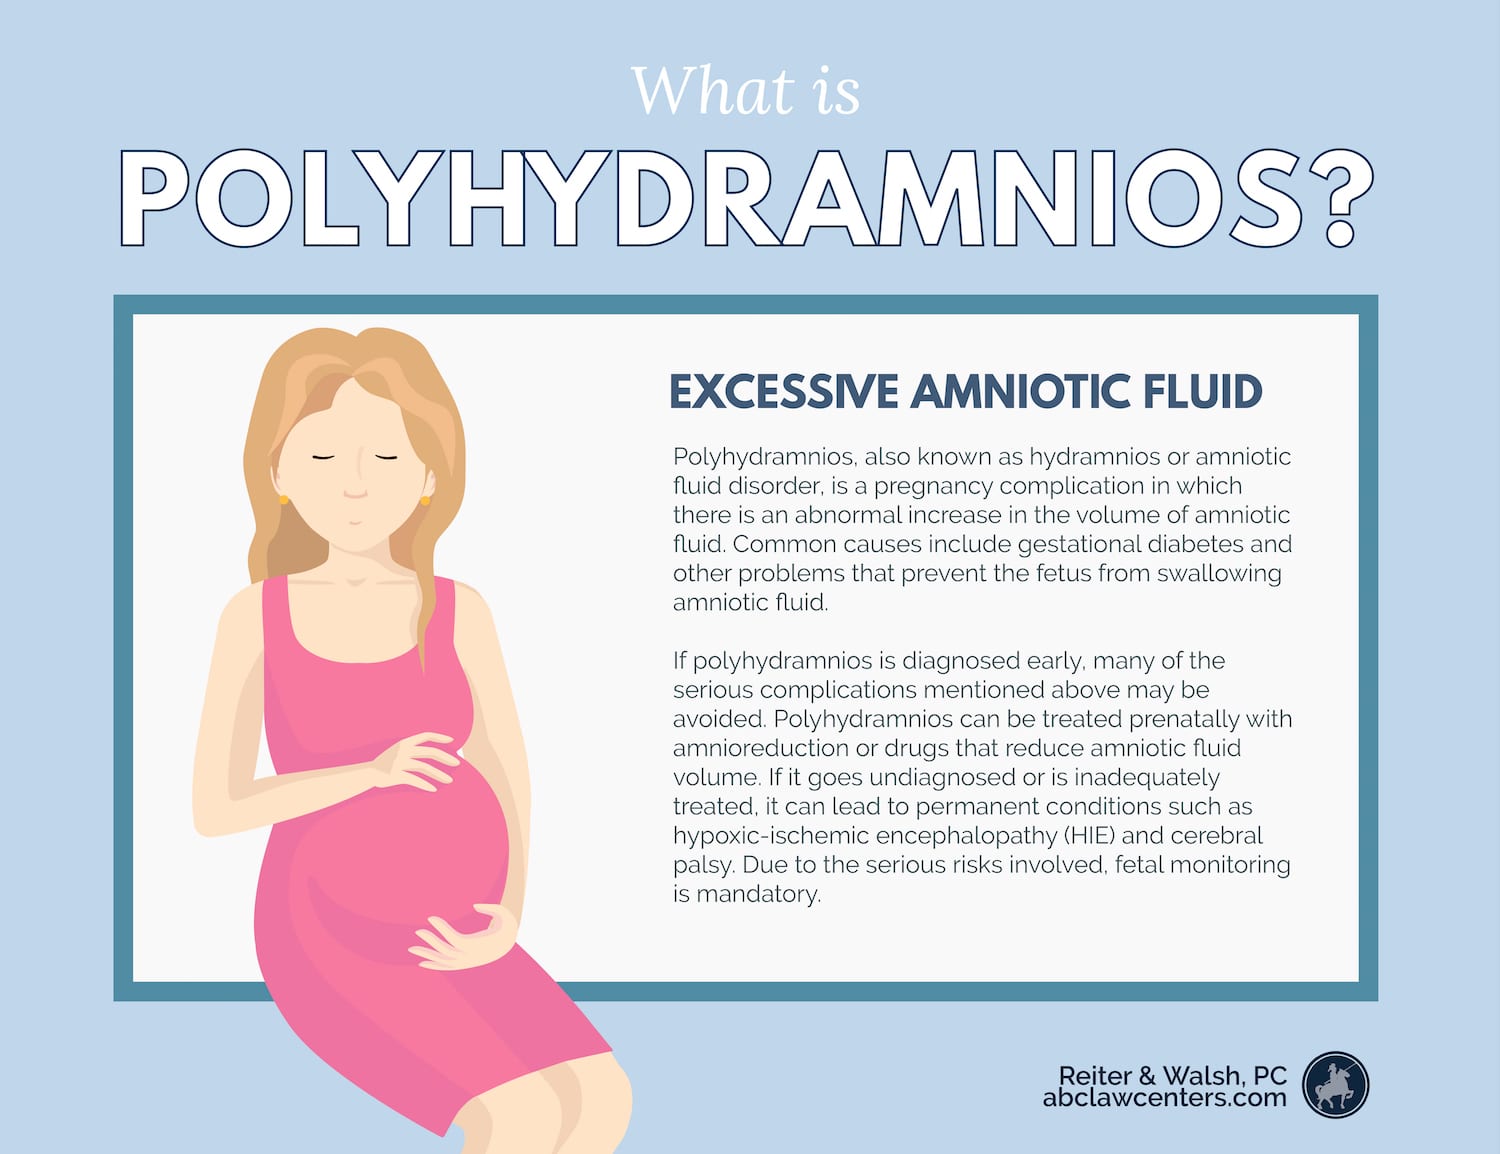 what is polyhydramnios?